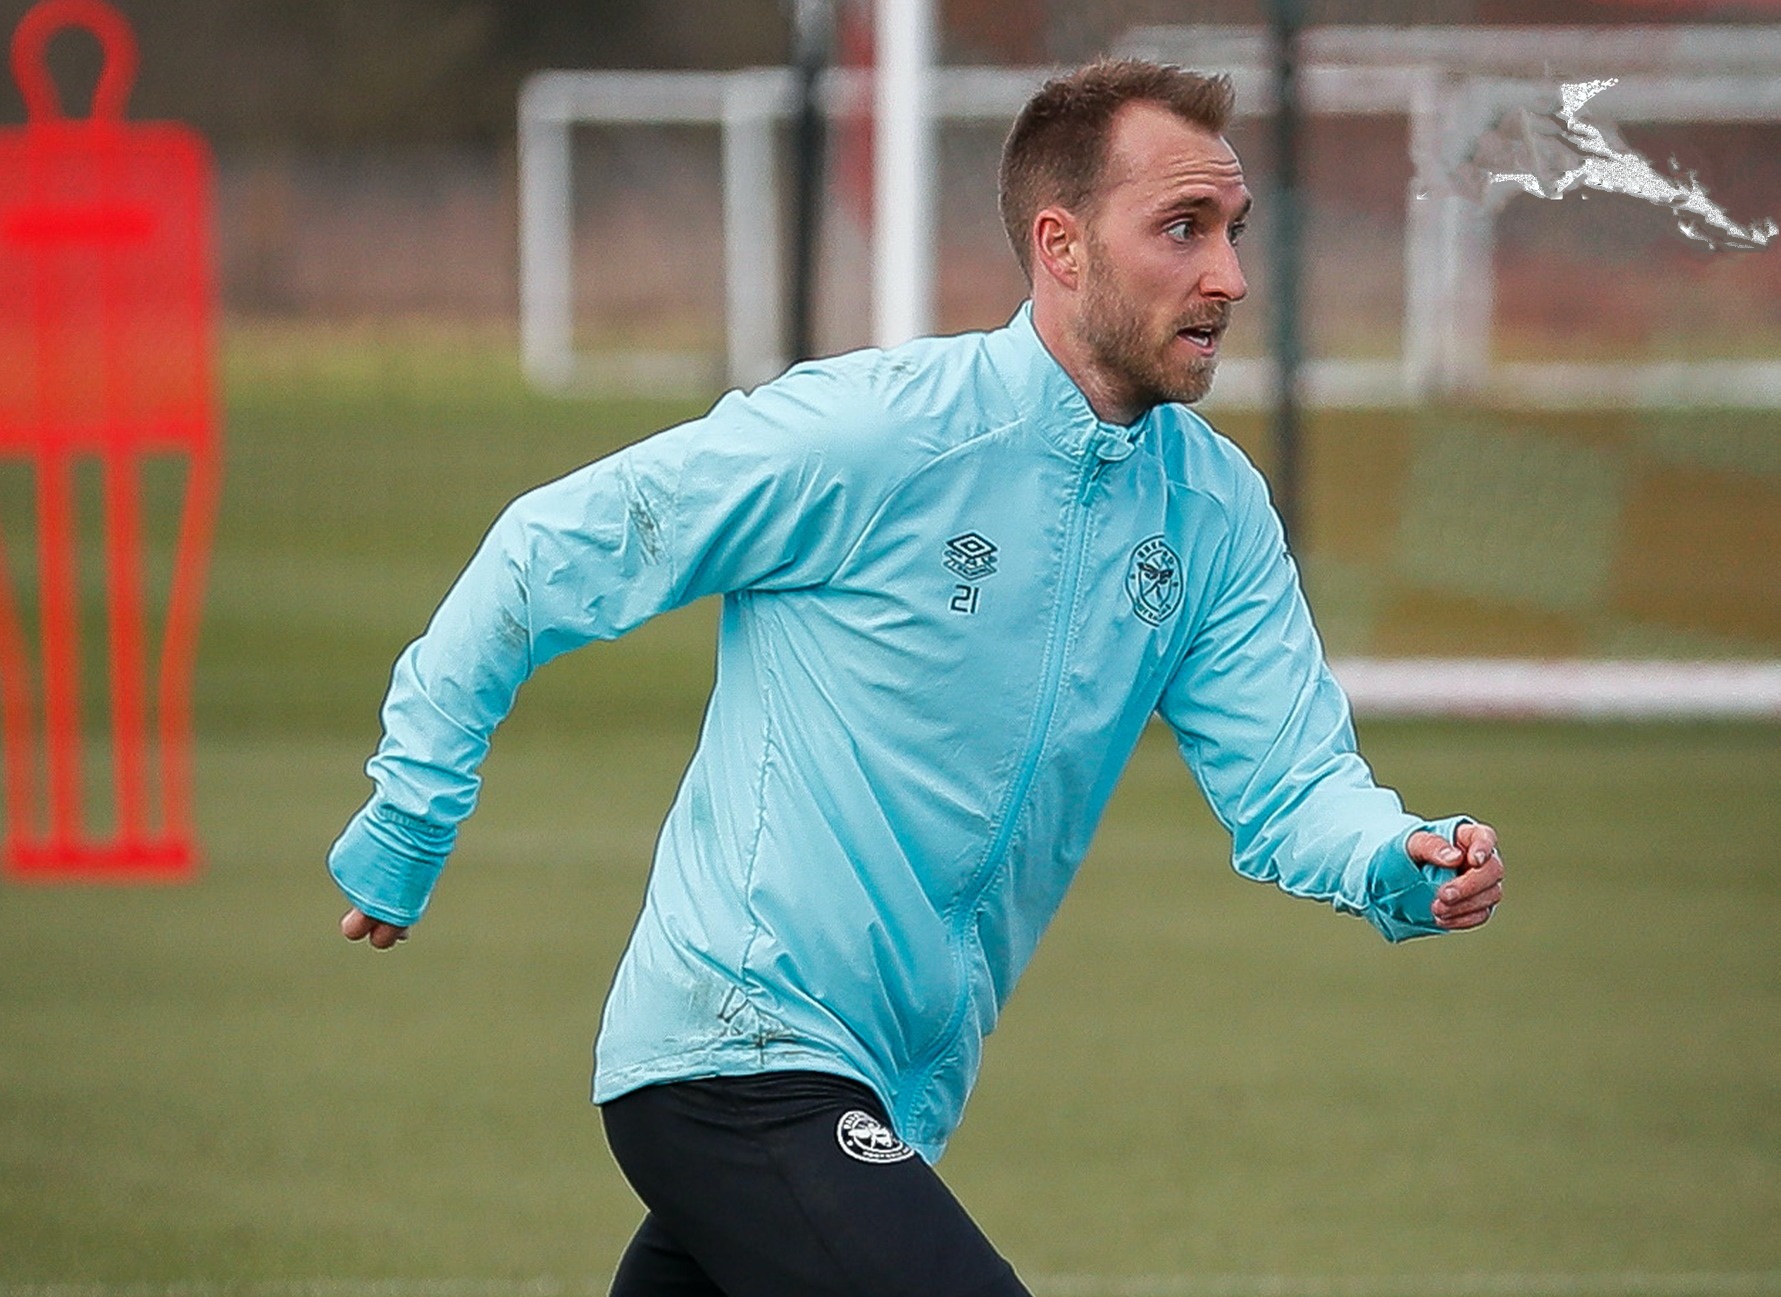 Returning to the Premier League, Eriksen made everyone admire on the training ground - Football